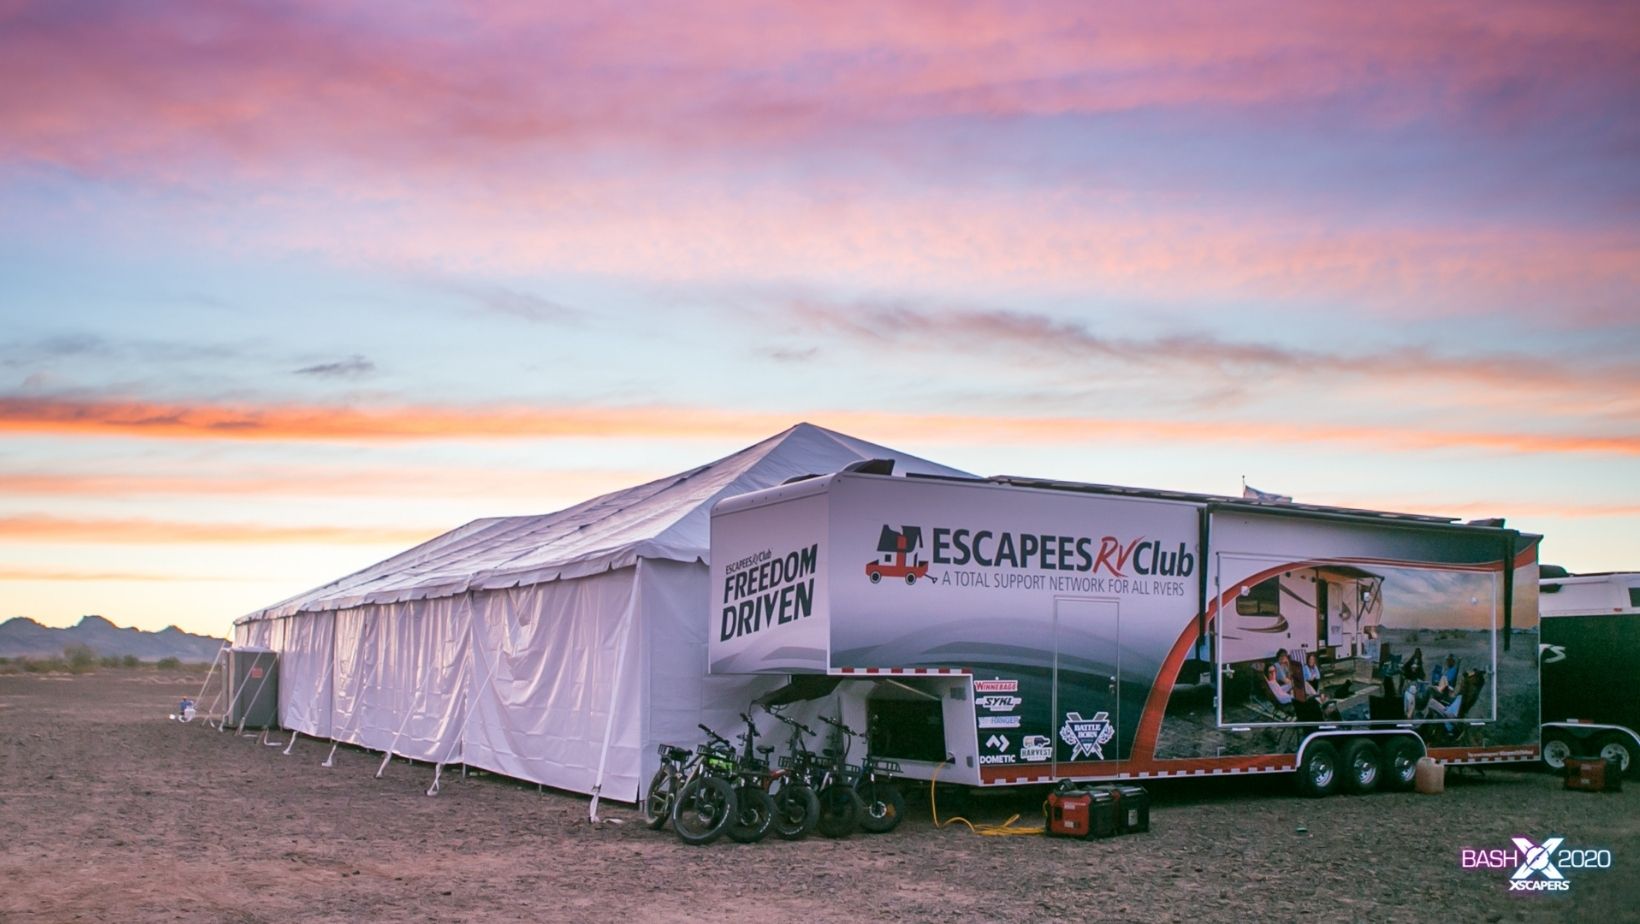 View of the entire Escapees event trailer with tent deployed and e-bikes parked nearby.